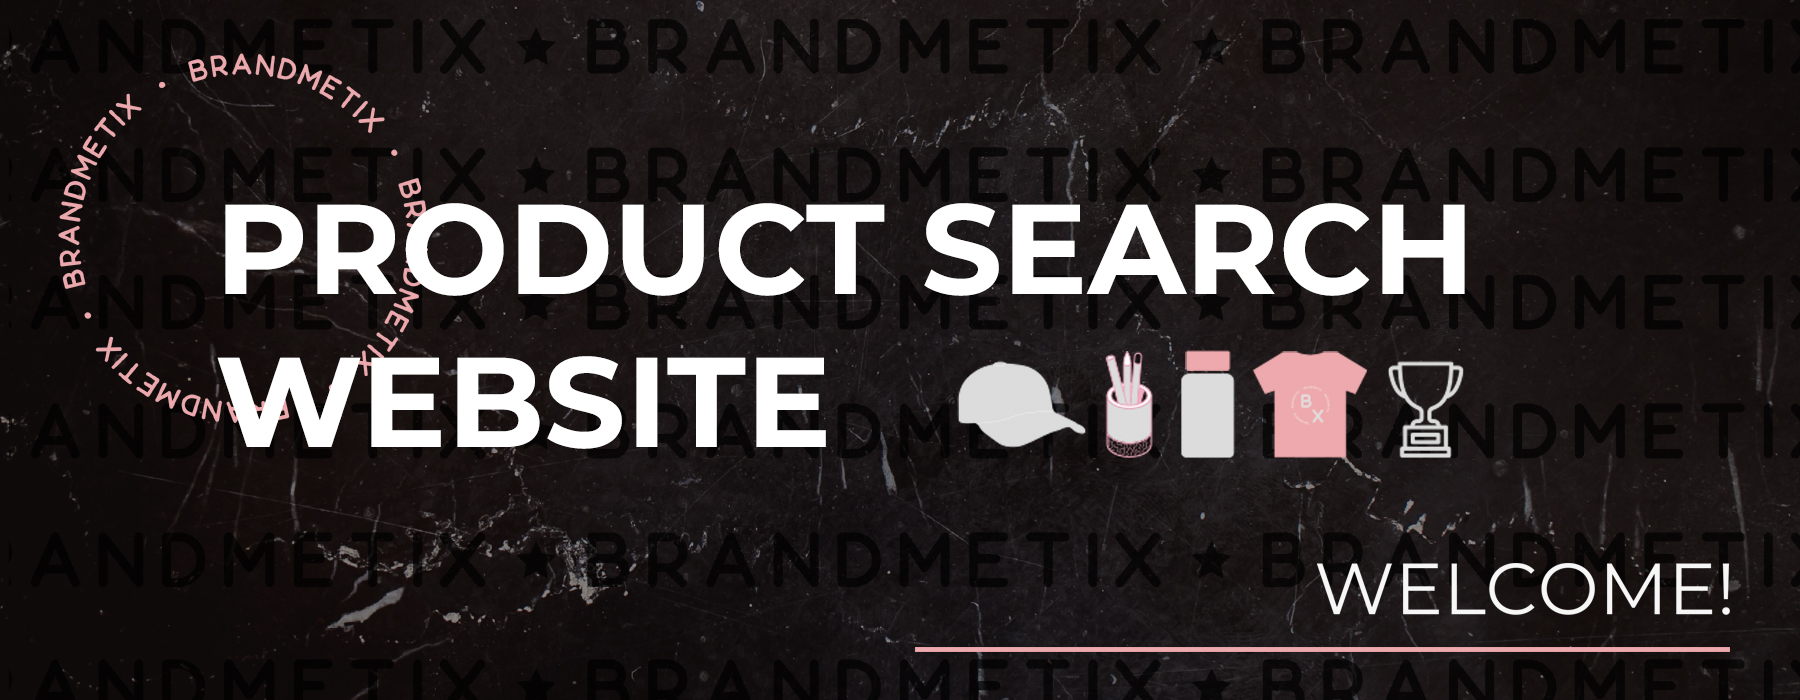 product search website